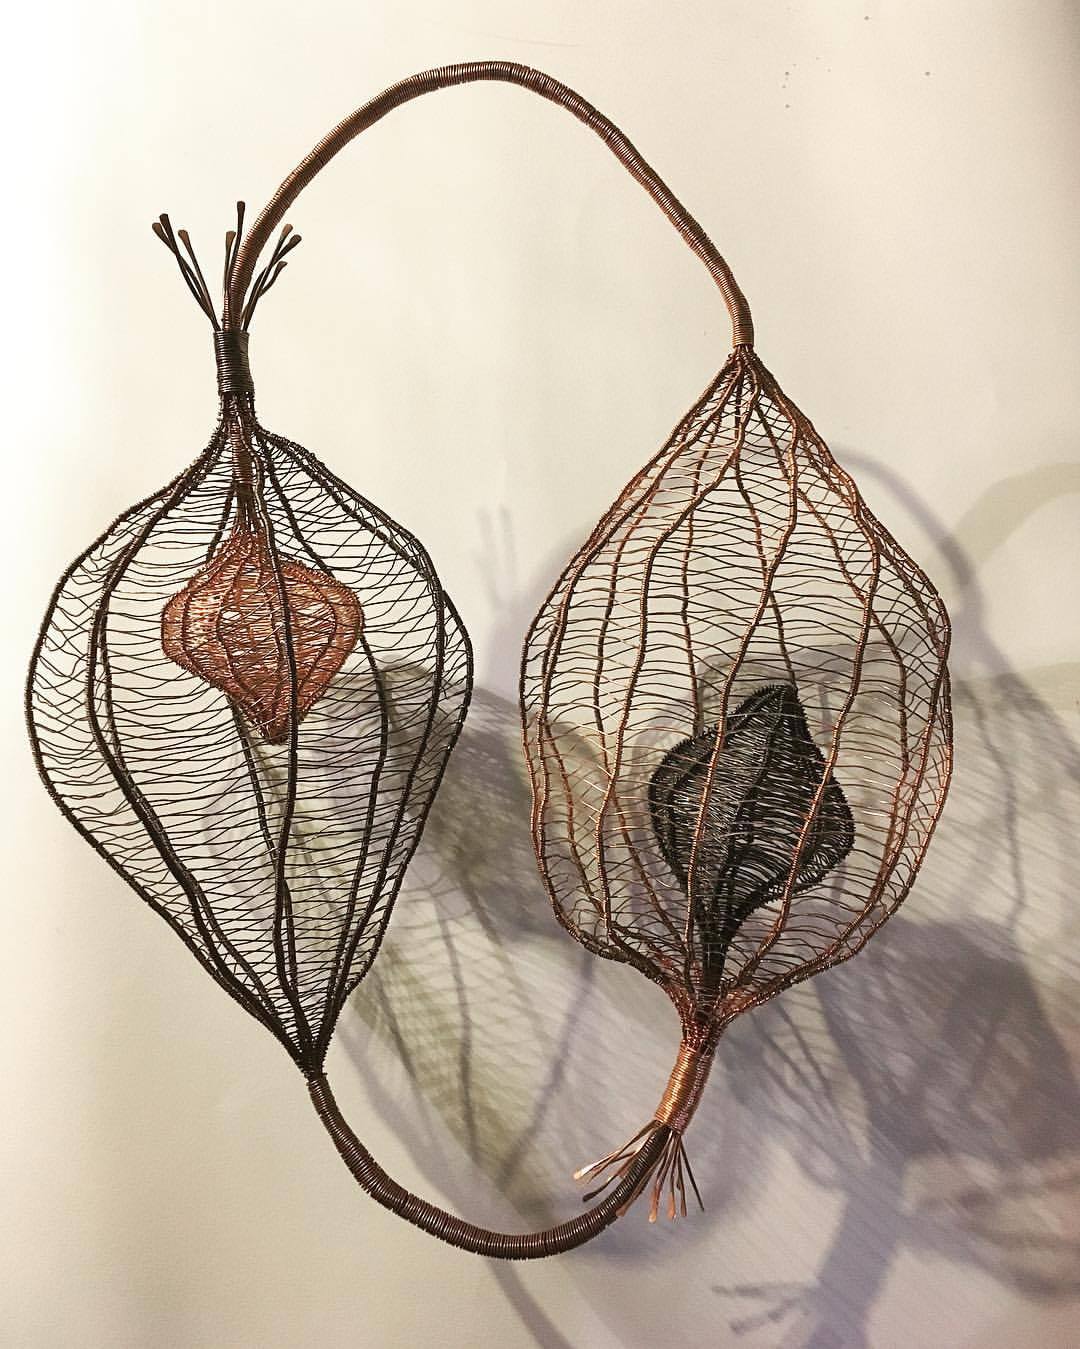 Fascinating Organic Shaped Copper Wire Sculptures By Sally Blake 2